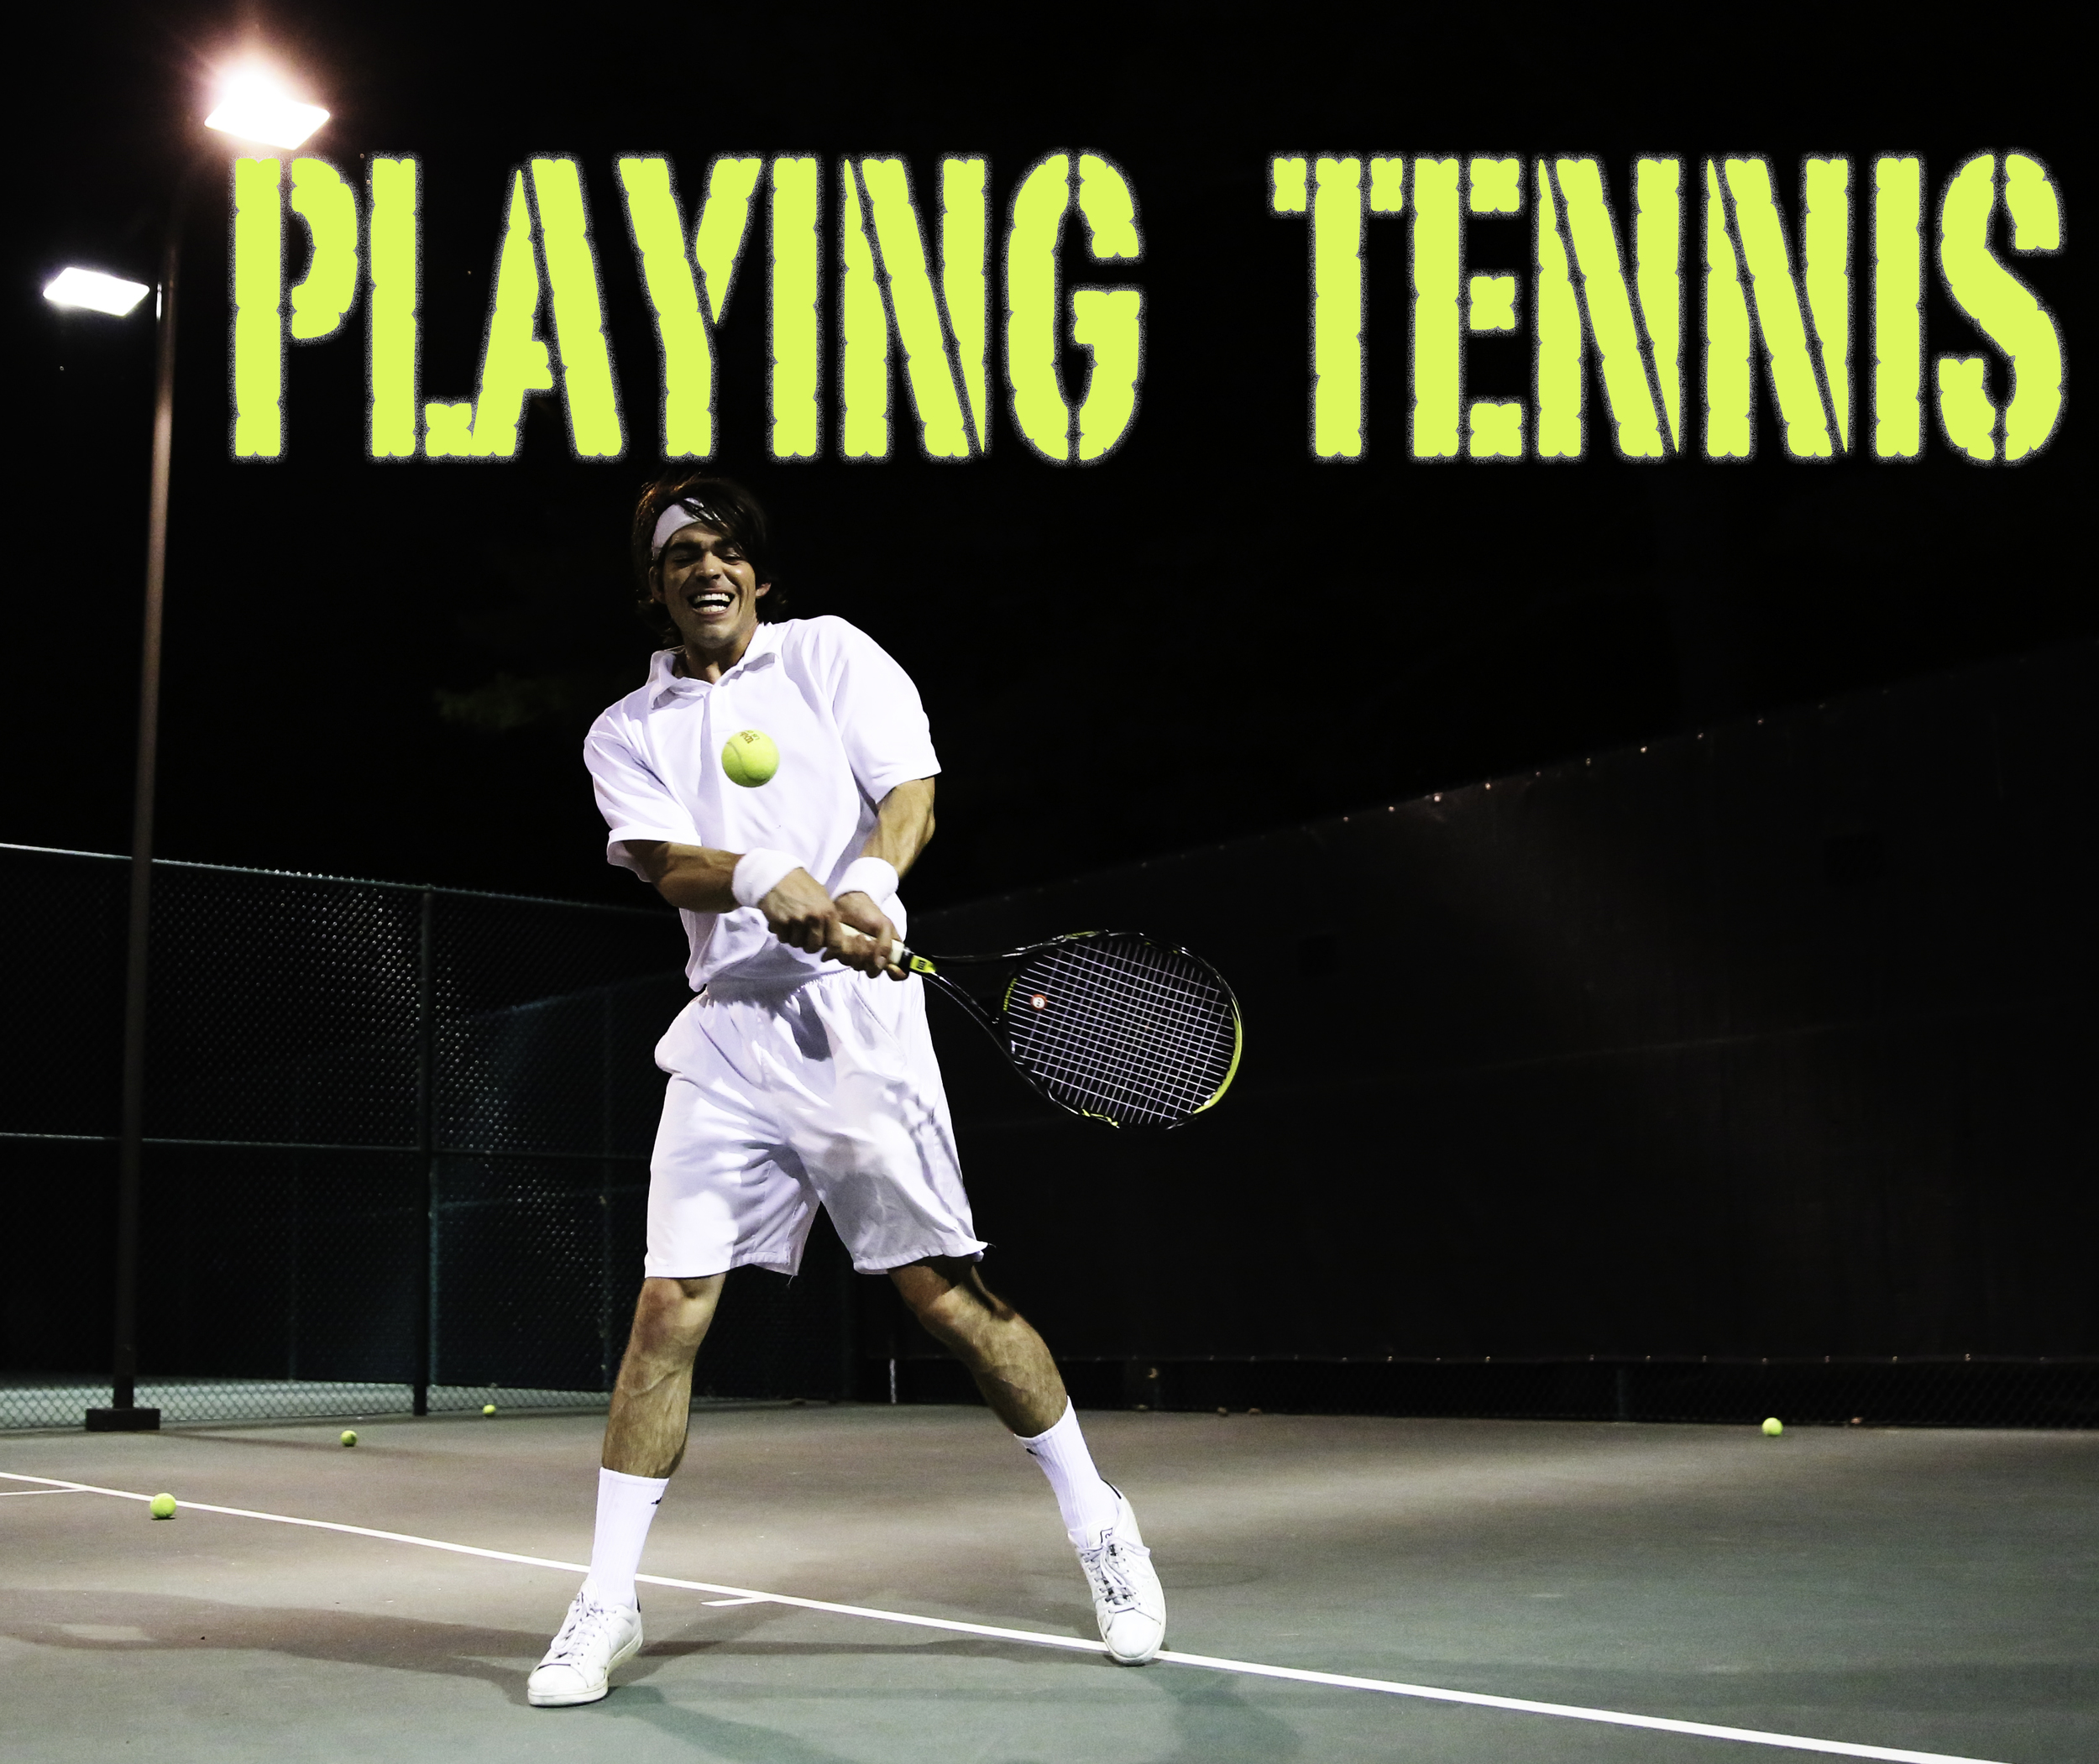  Contact me to book a tennis lesson and begin developing a skill that will last you a lifetime! 